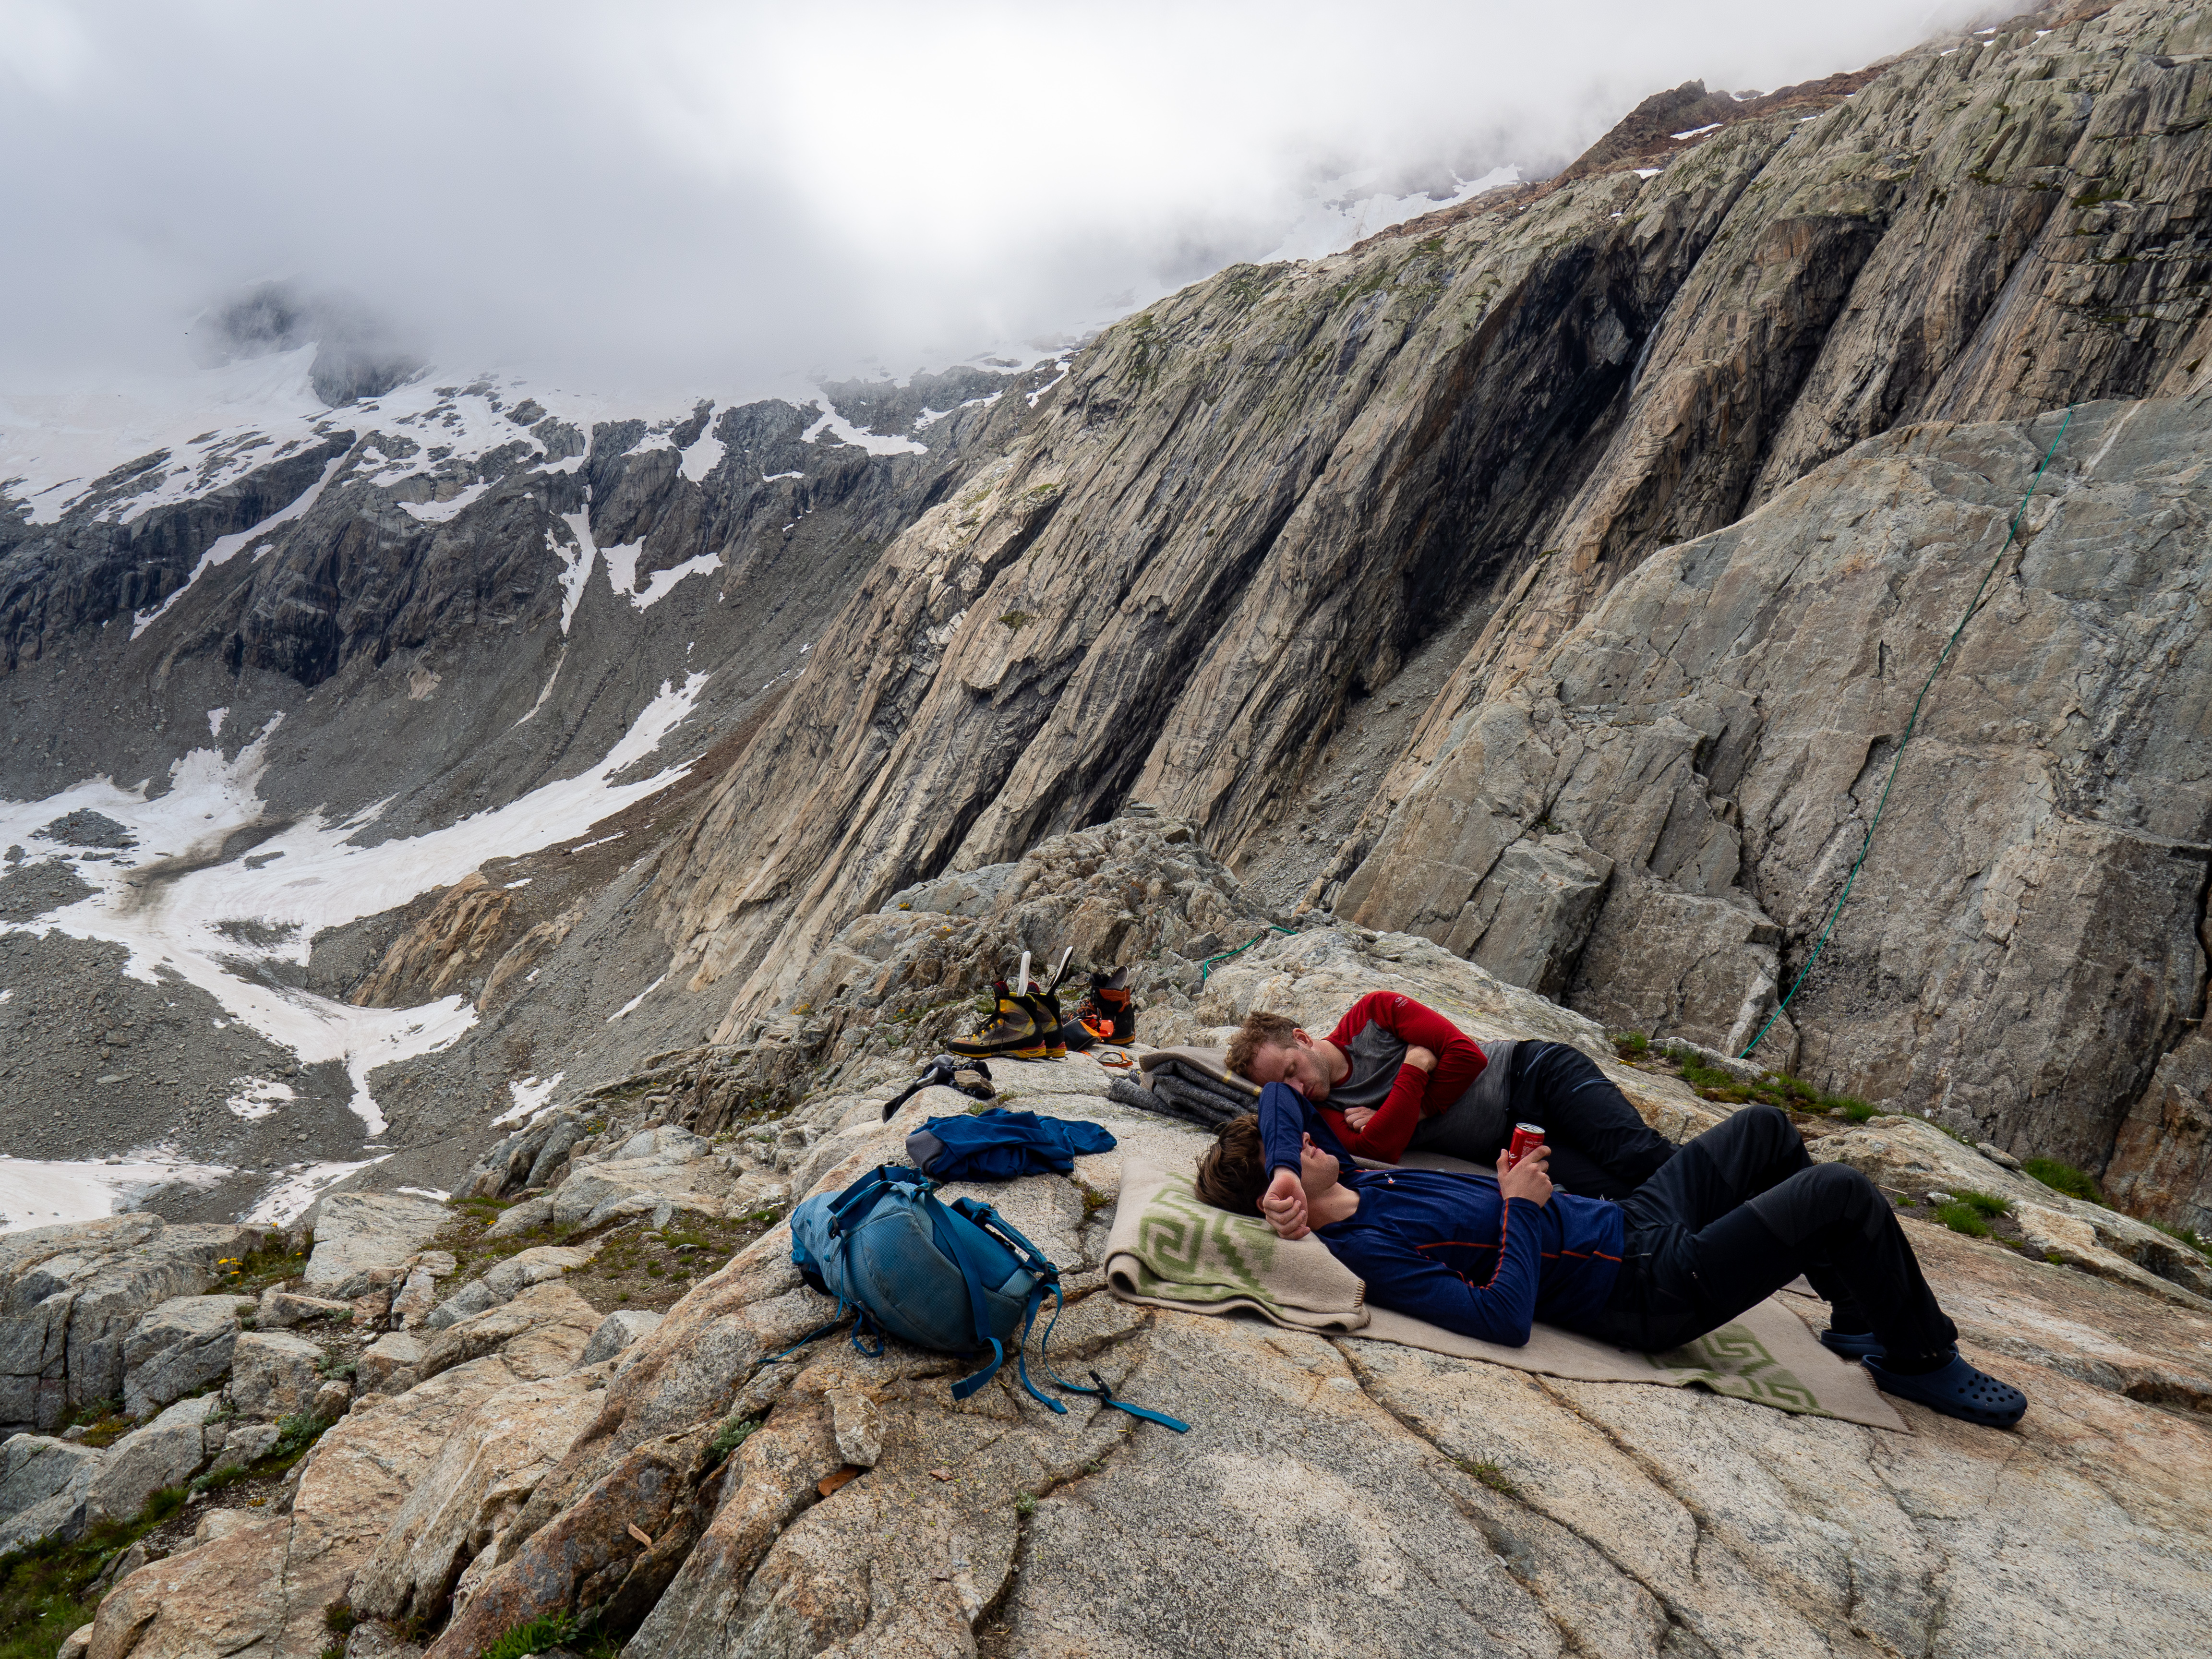 Relaxing in front of the Gruebenhütte after the climb